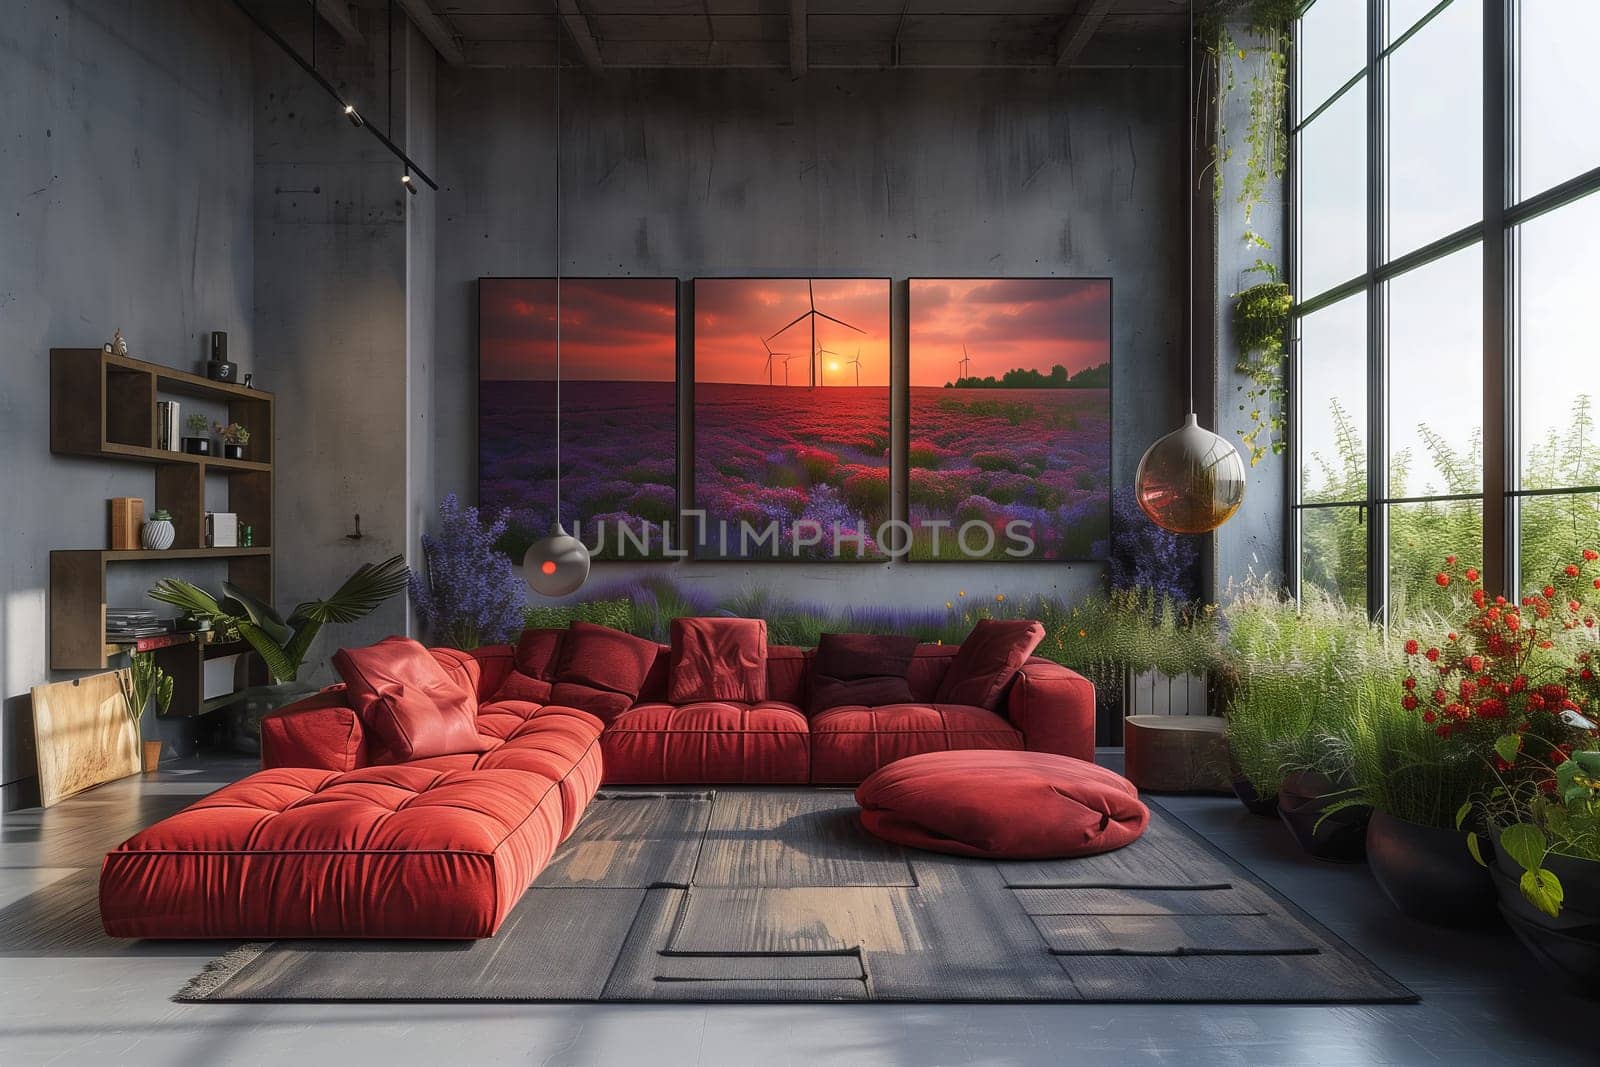 Living room with red sectional couch, wall painting, and cozy interior design by richwolf